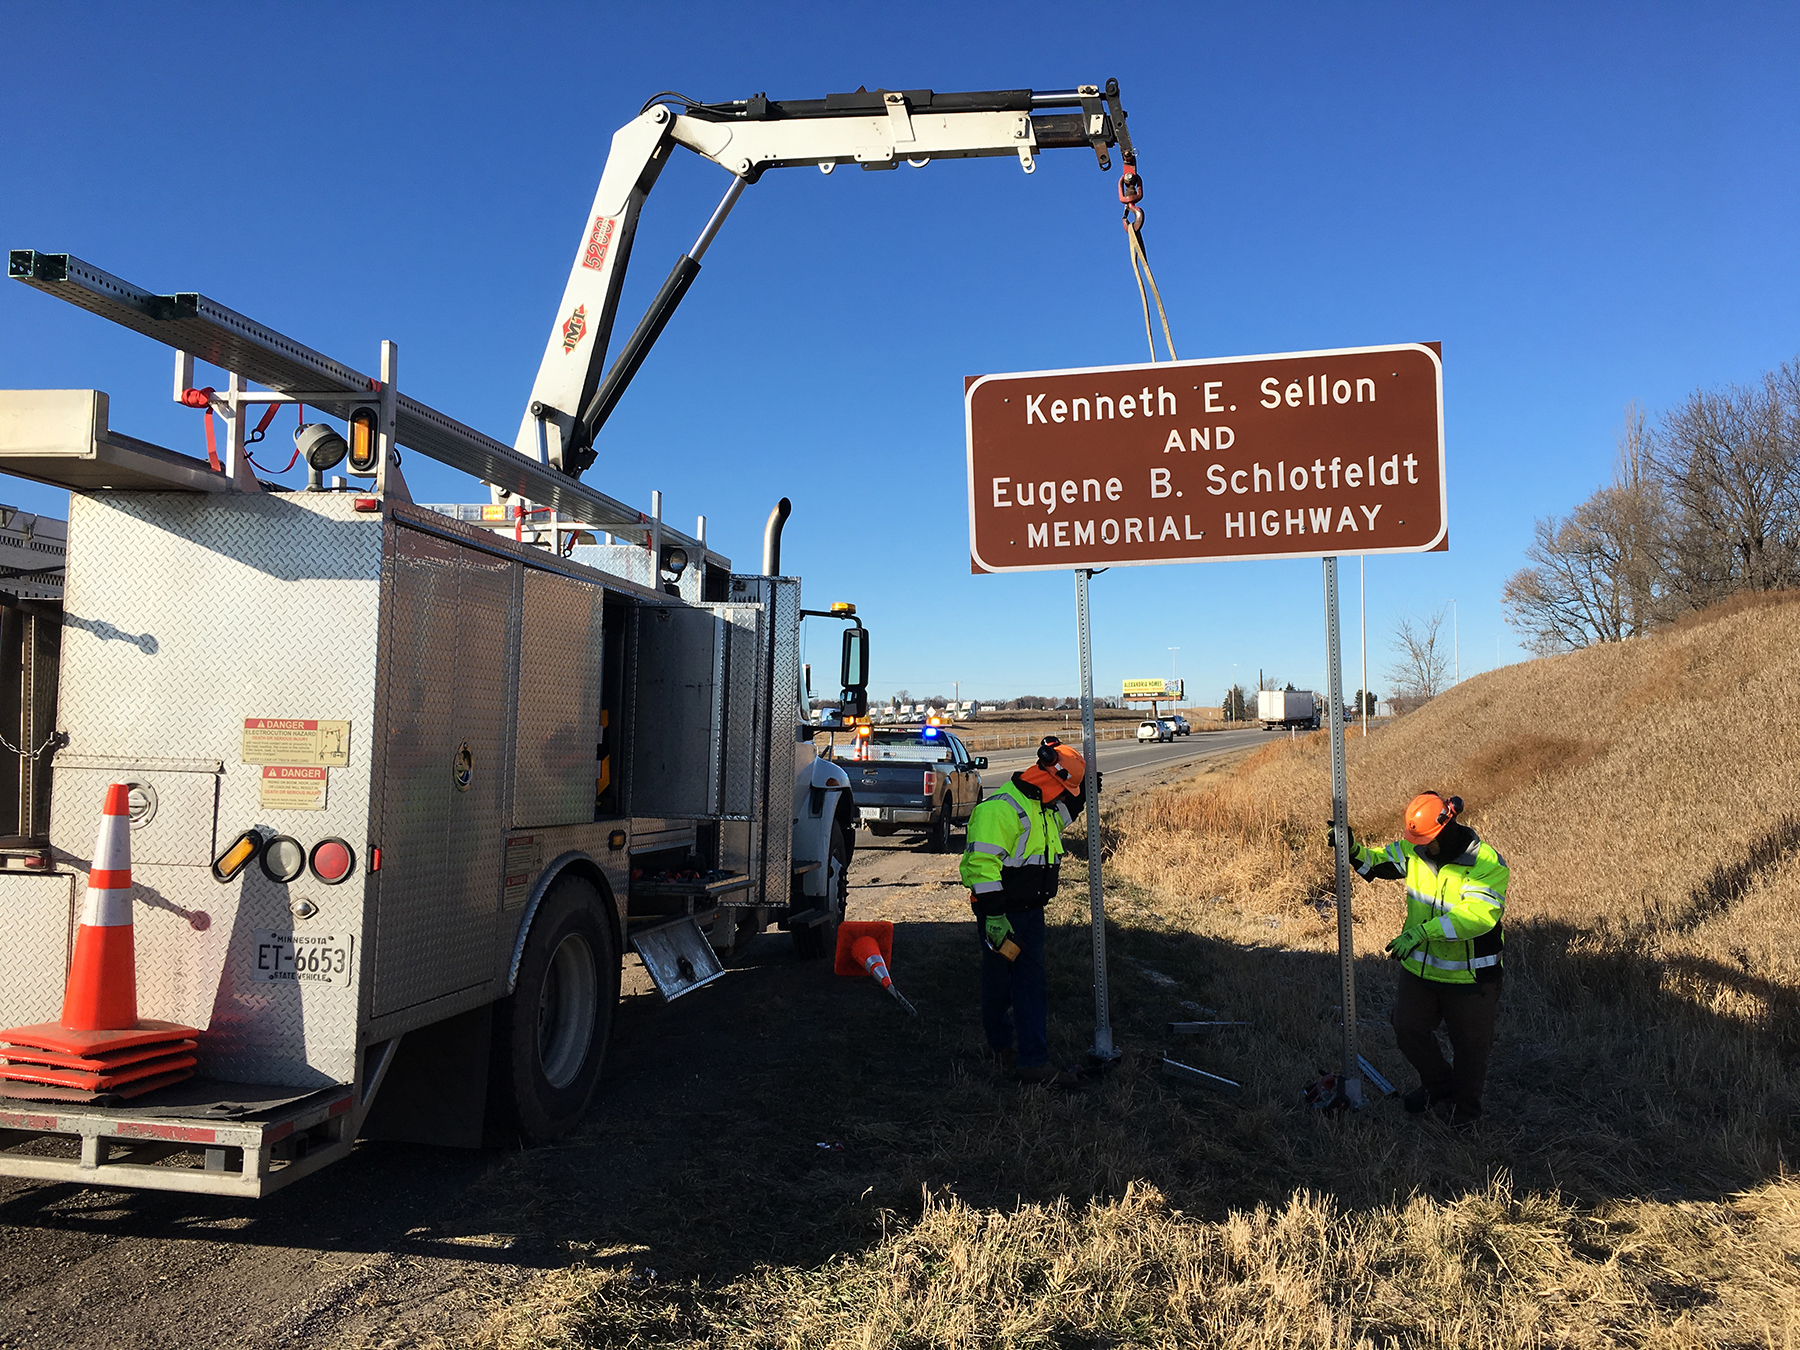 Photo: work crews install a sign on the side of Interstate 94. The sign says Kenneth E Sellon and Eugene B Schlotfeldt memorial highway